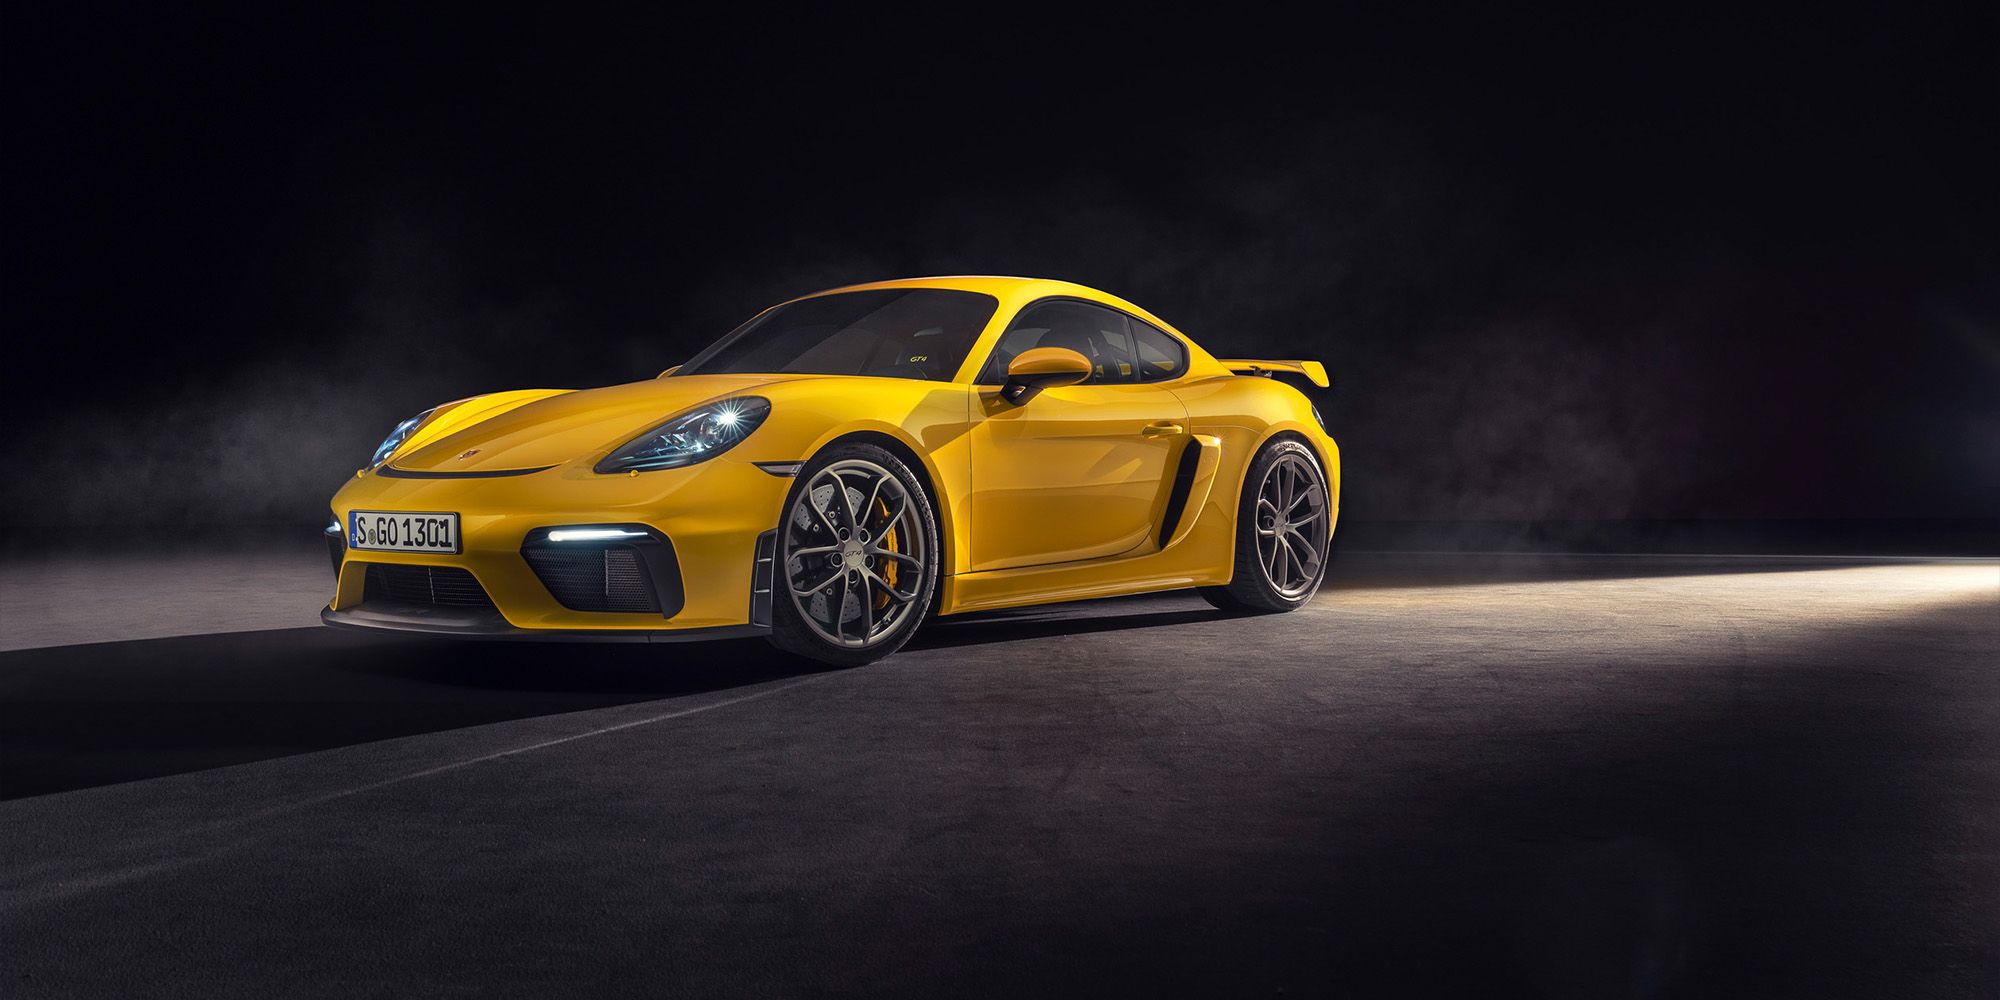 The front of the 718 Cayman GT4